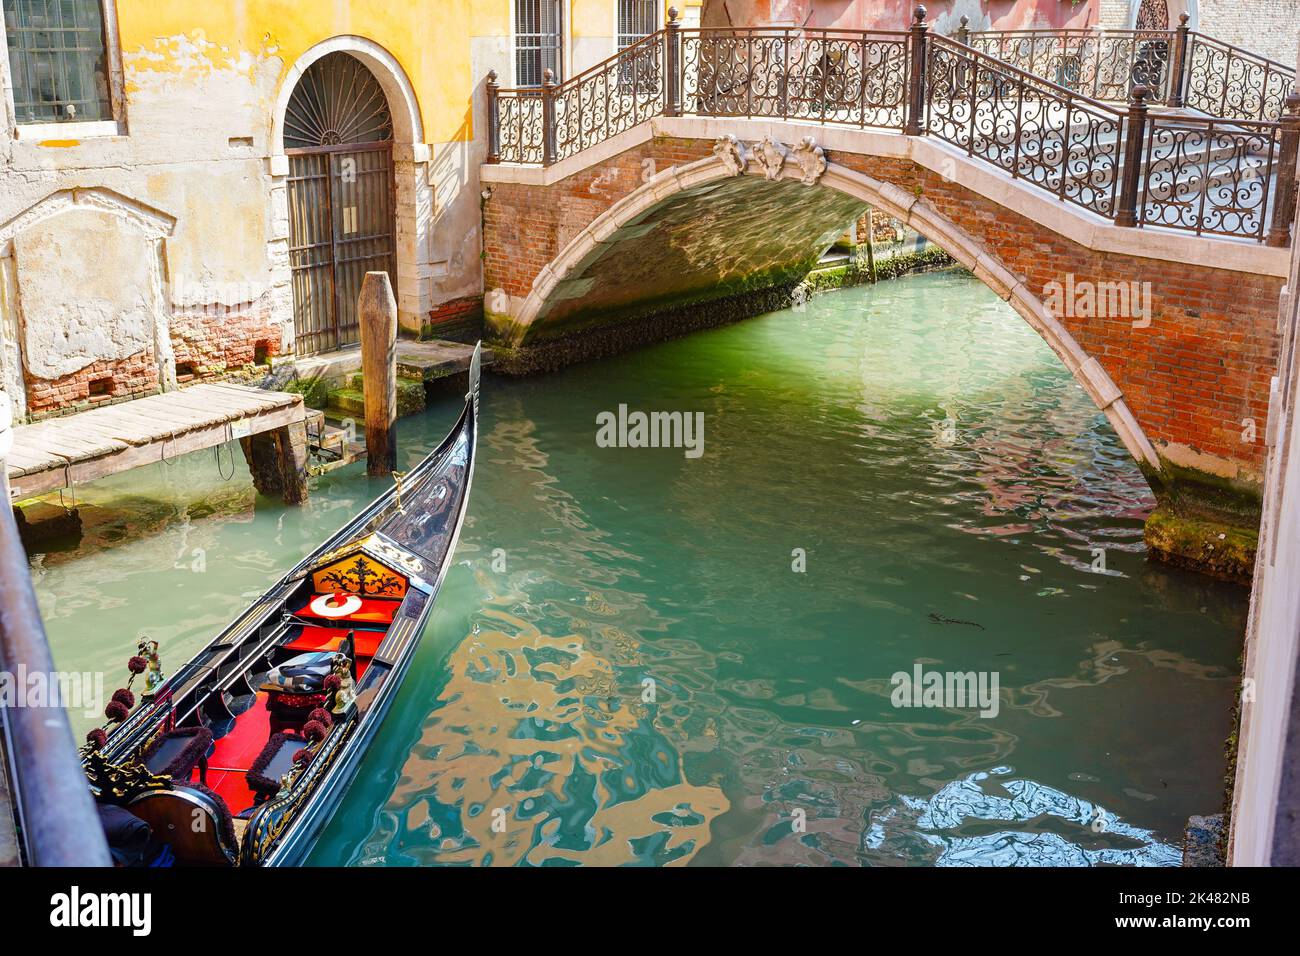 A traditional bridge over a canal in the city of Venice, Italy Stock Photo